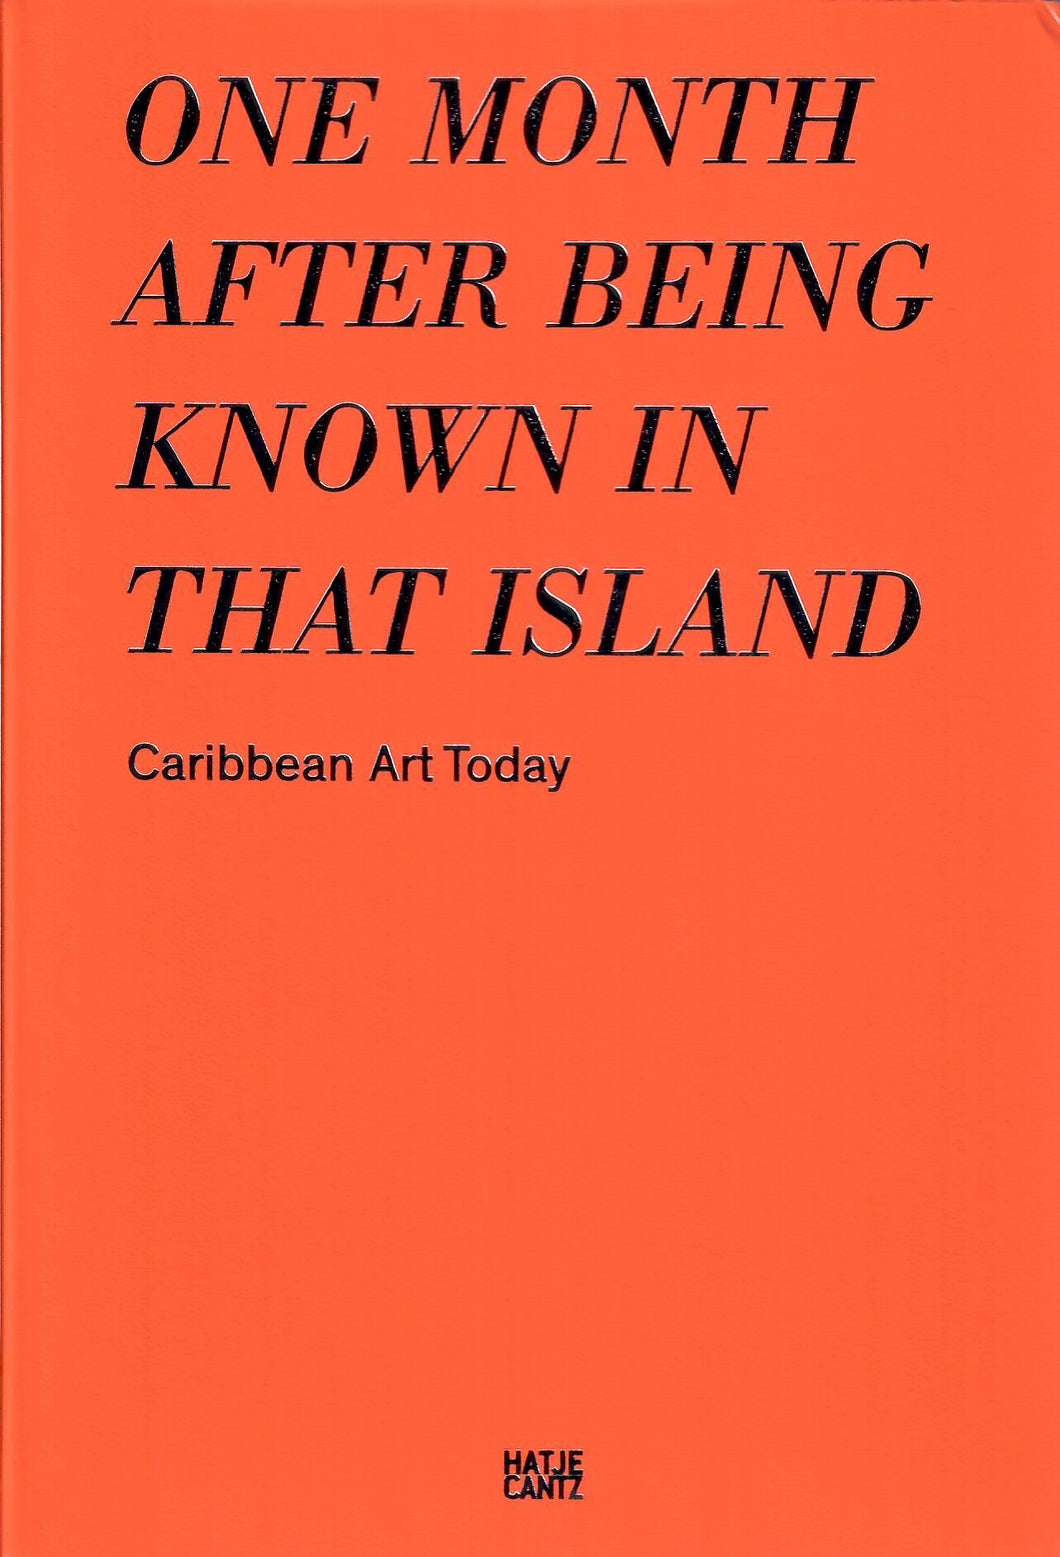 ONE MONTH AFTER BEING KNOWN IN THAT ISLAND - Albertine Kopp